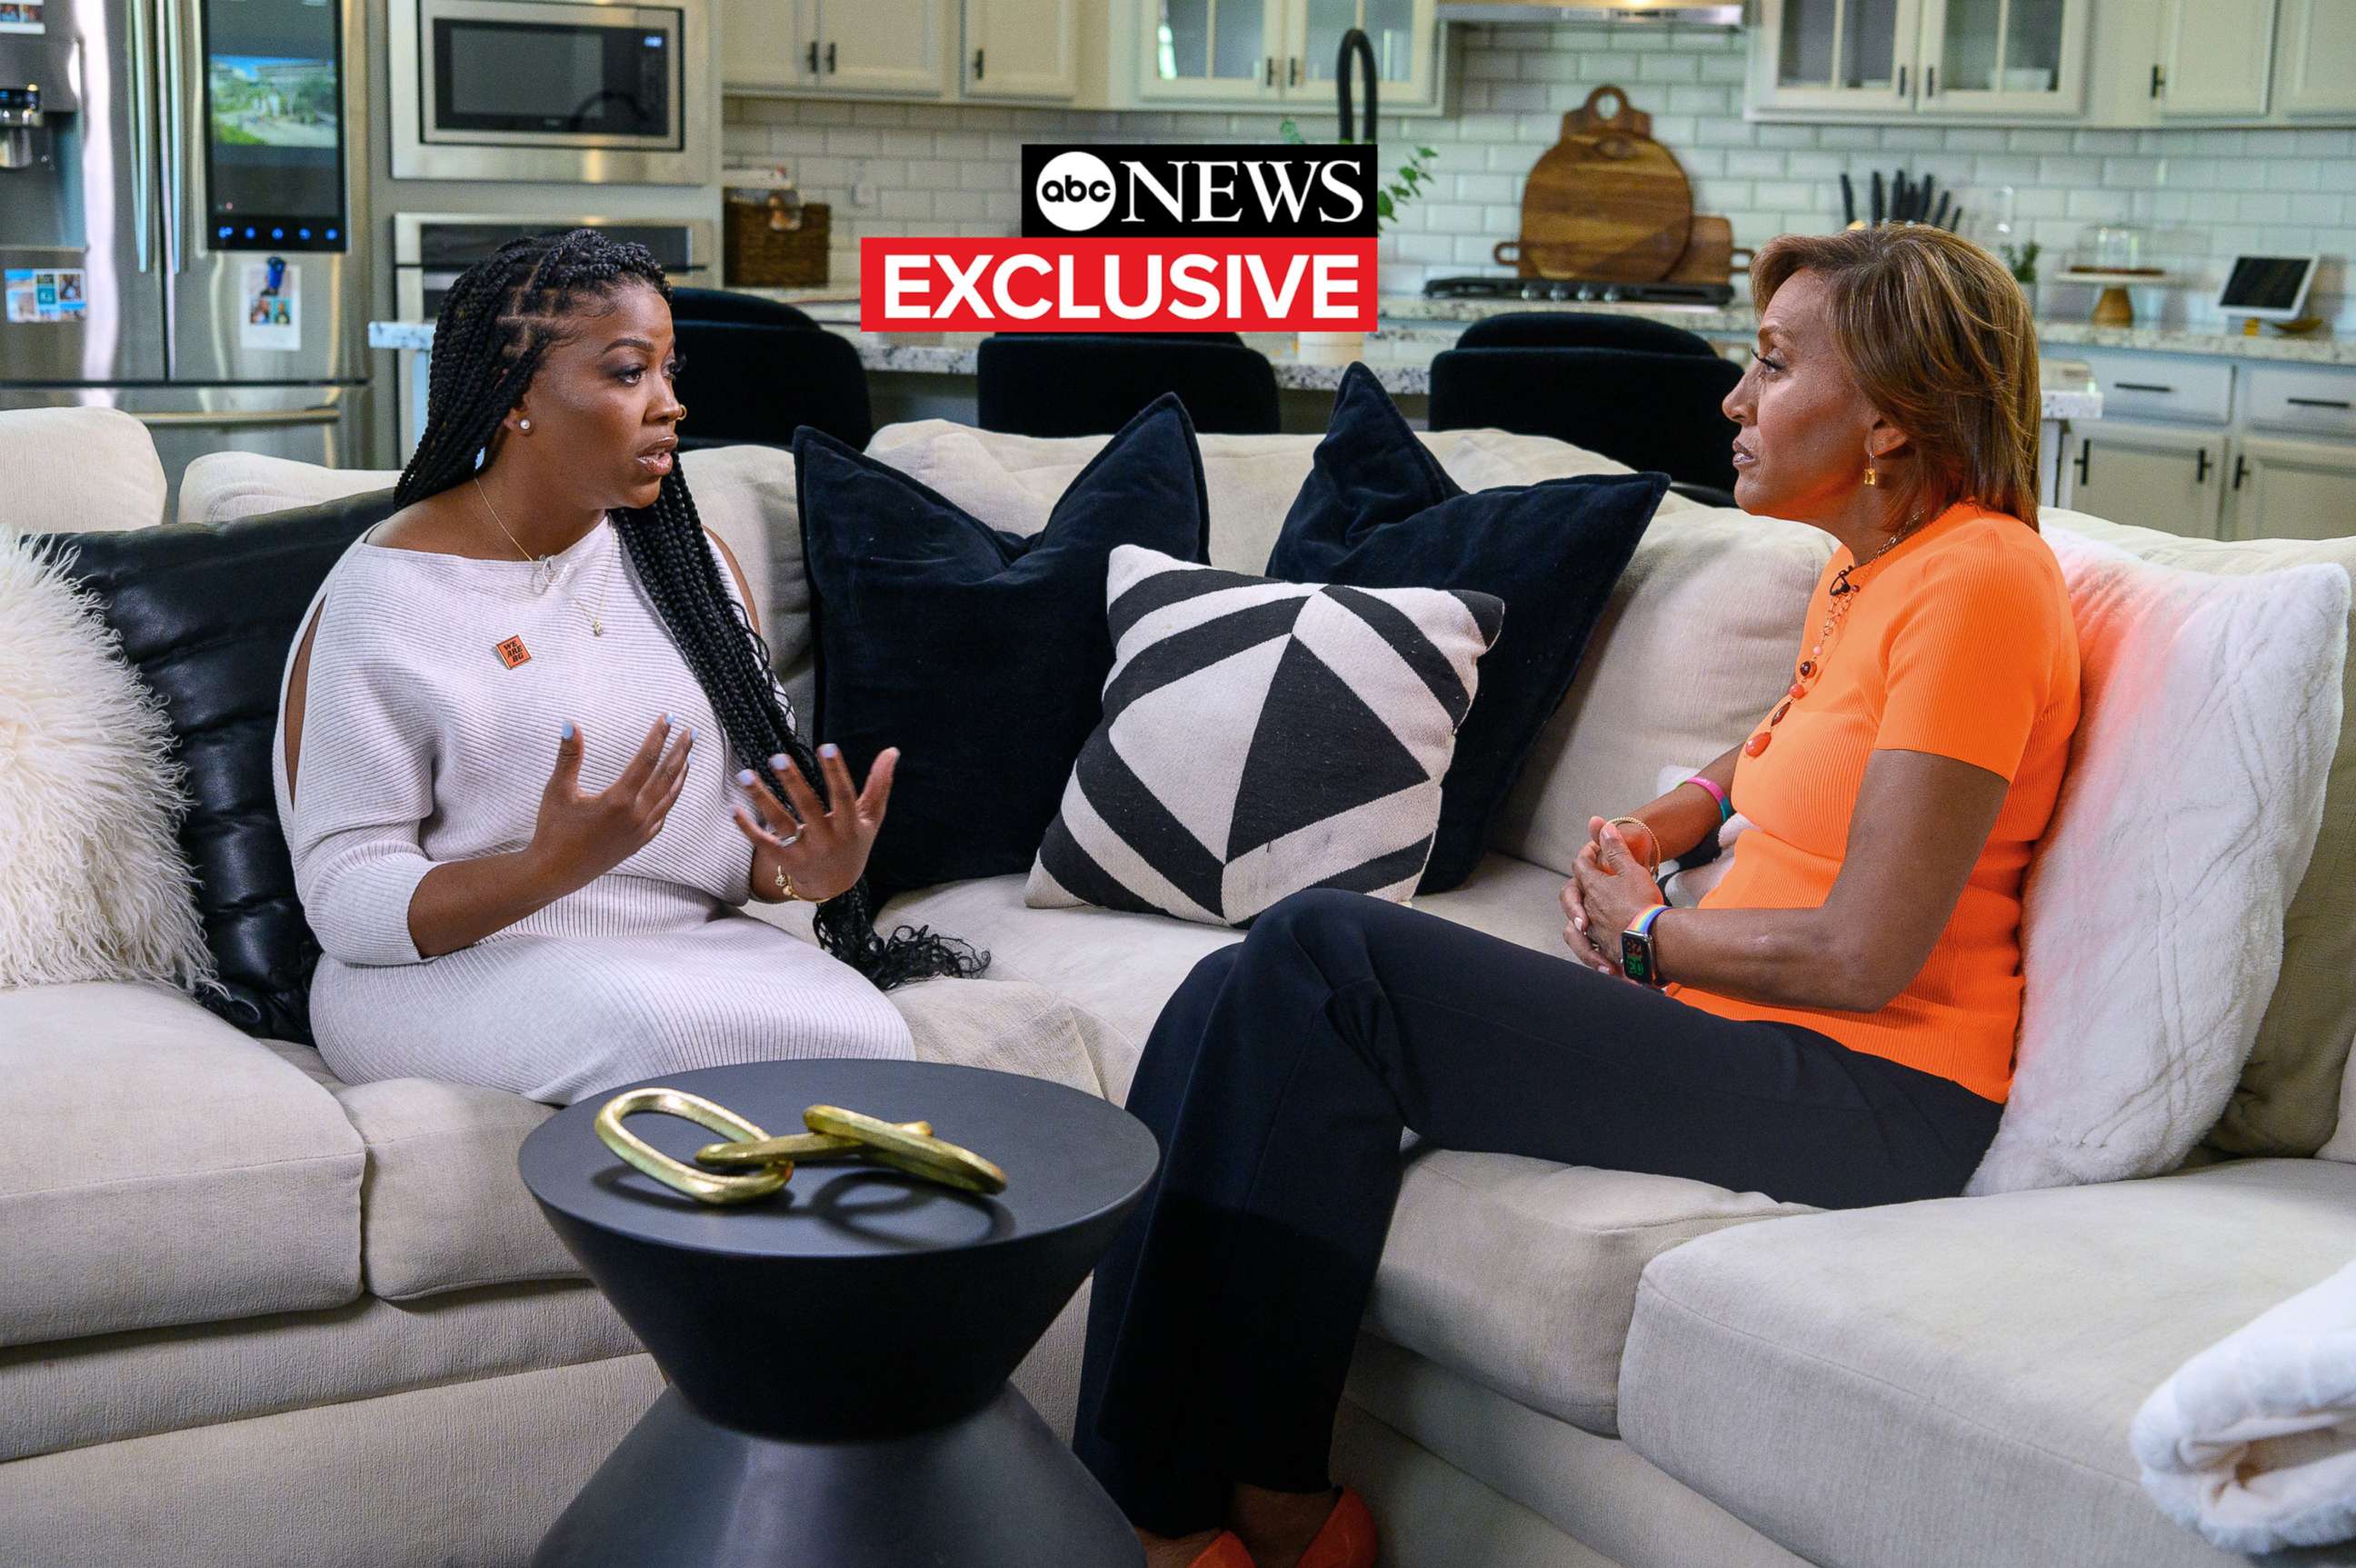 PHOTO: Good Morning America's co-anchor Robin Roberts interviews Brittney Griner's wife Cherelle Griner, May 24, 2022.